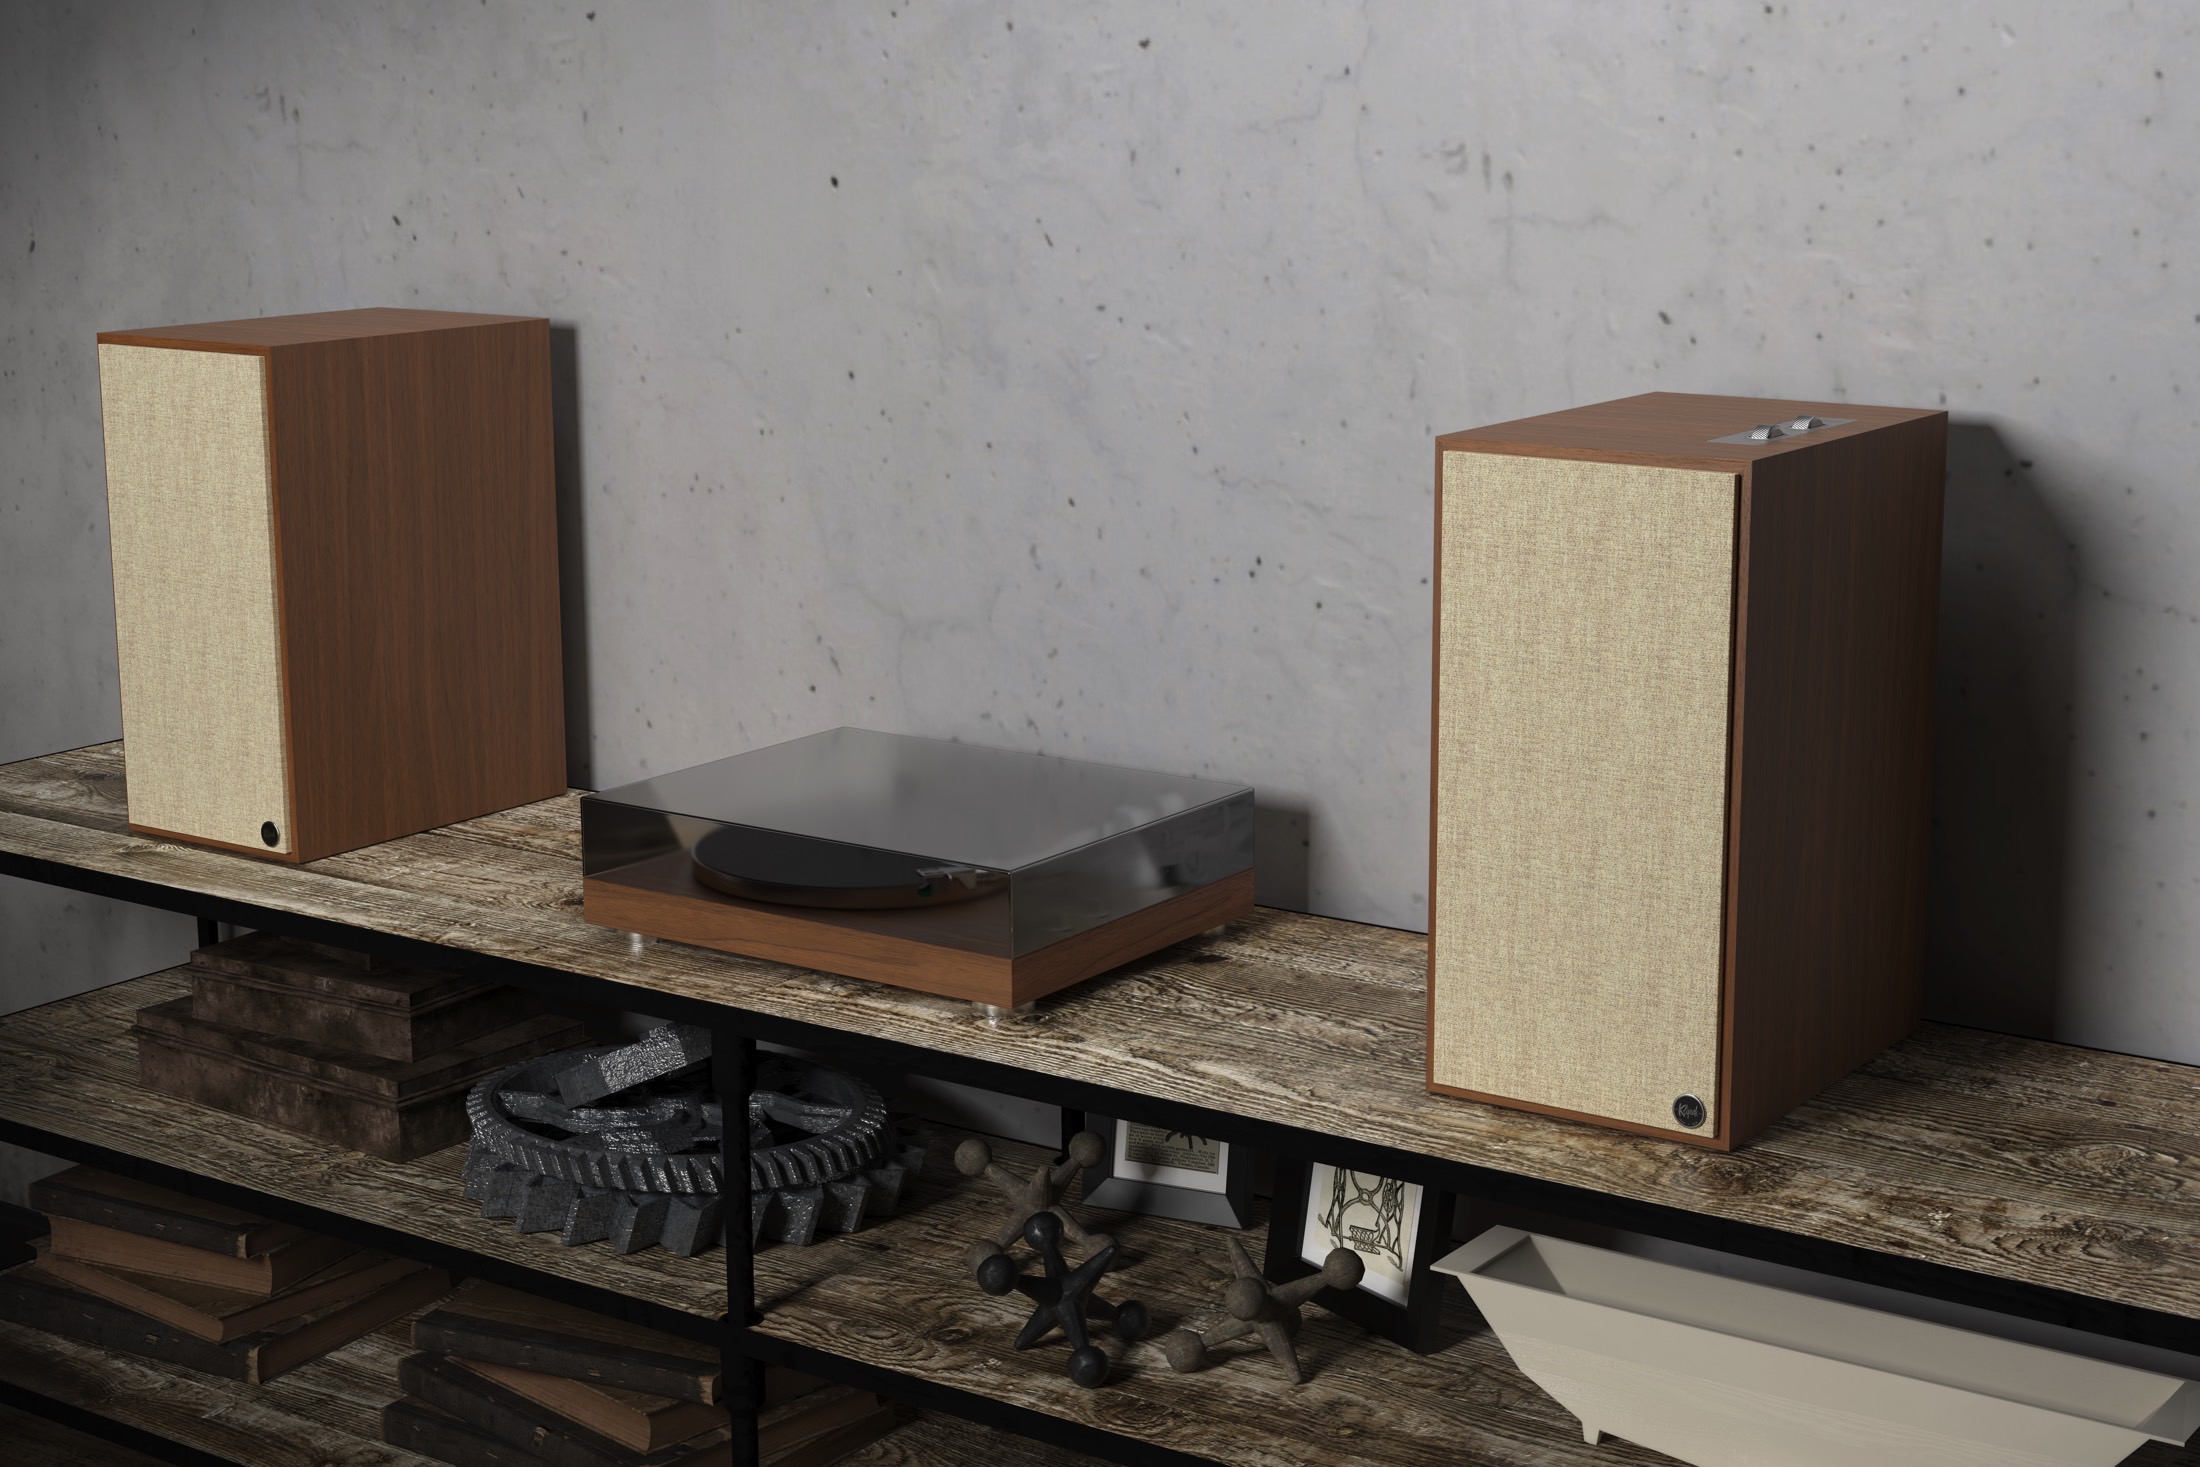 Klipsch The Nines in walnut finish next to a turntable.